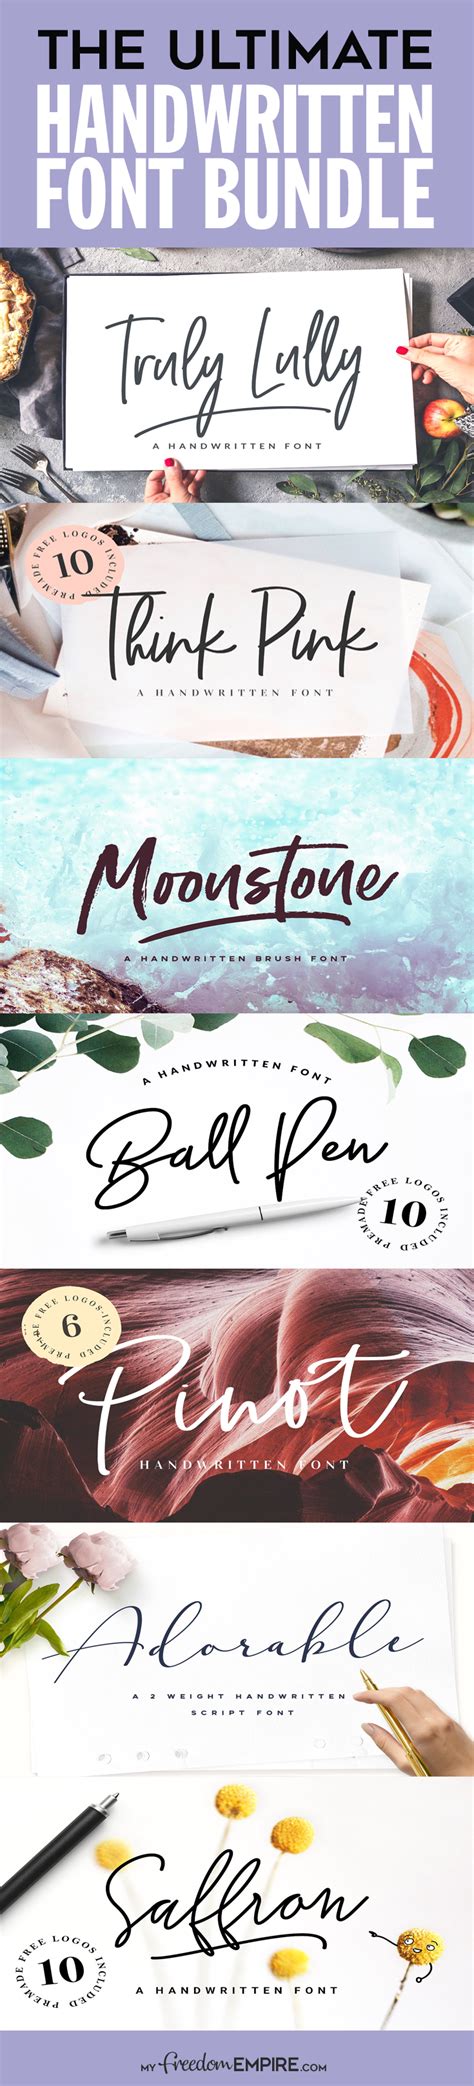 Handwritten Style Fonts Are Super Popular And A Must For Any Website